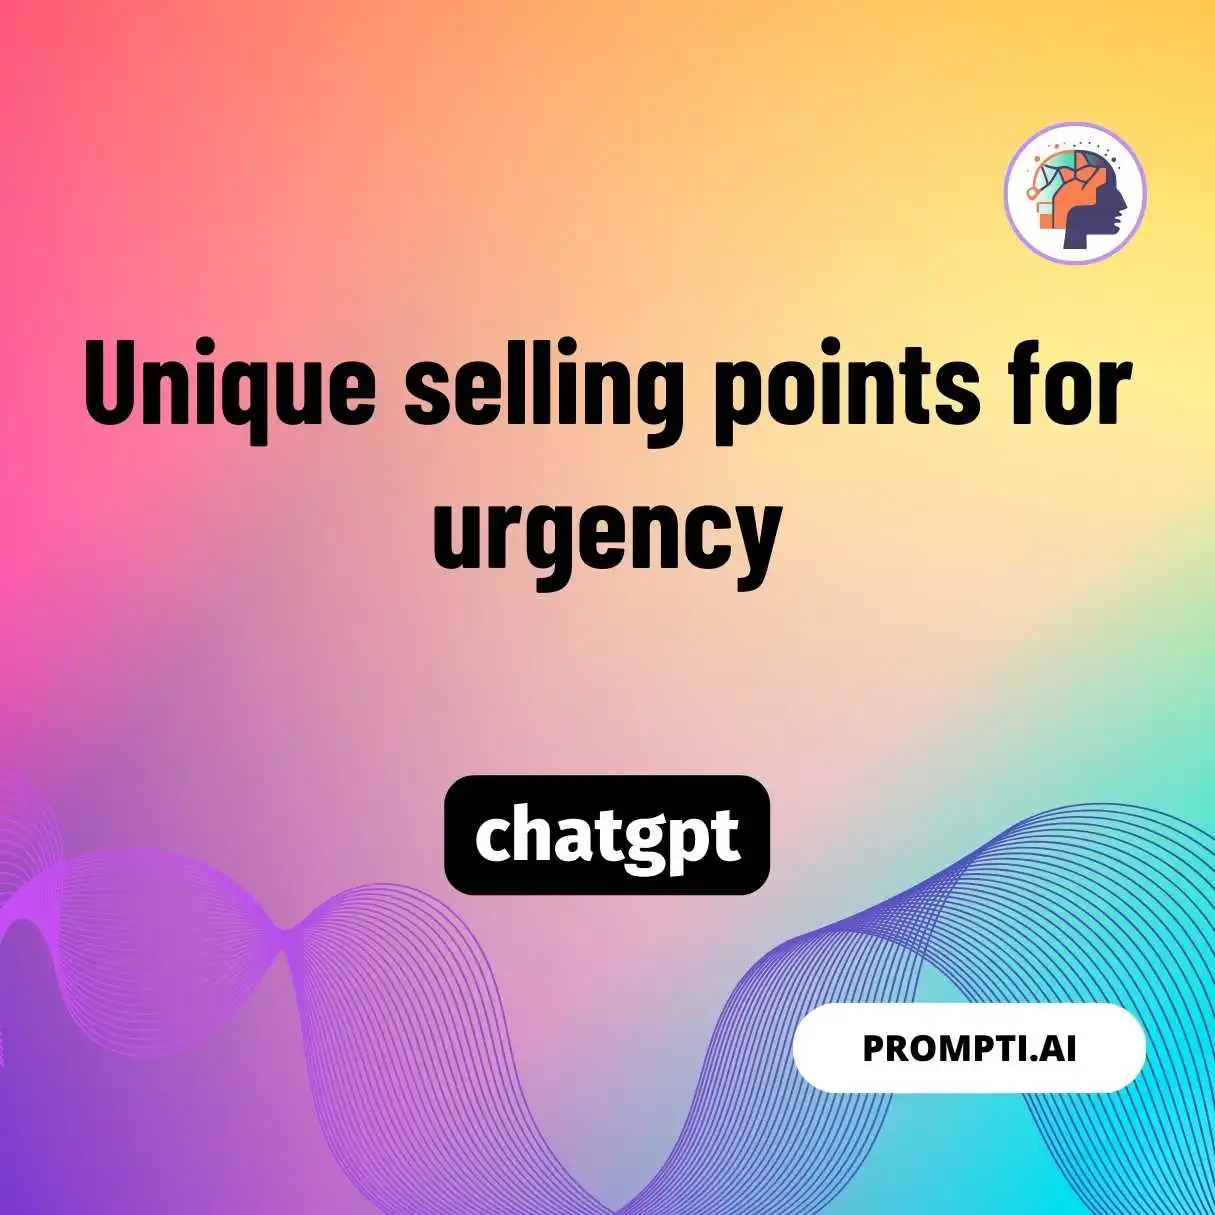 Unique selling points for urgency